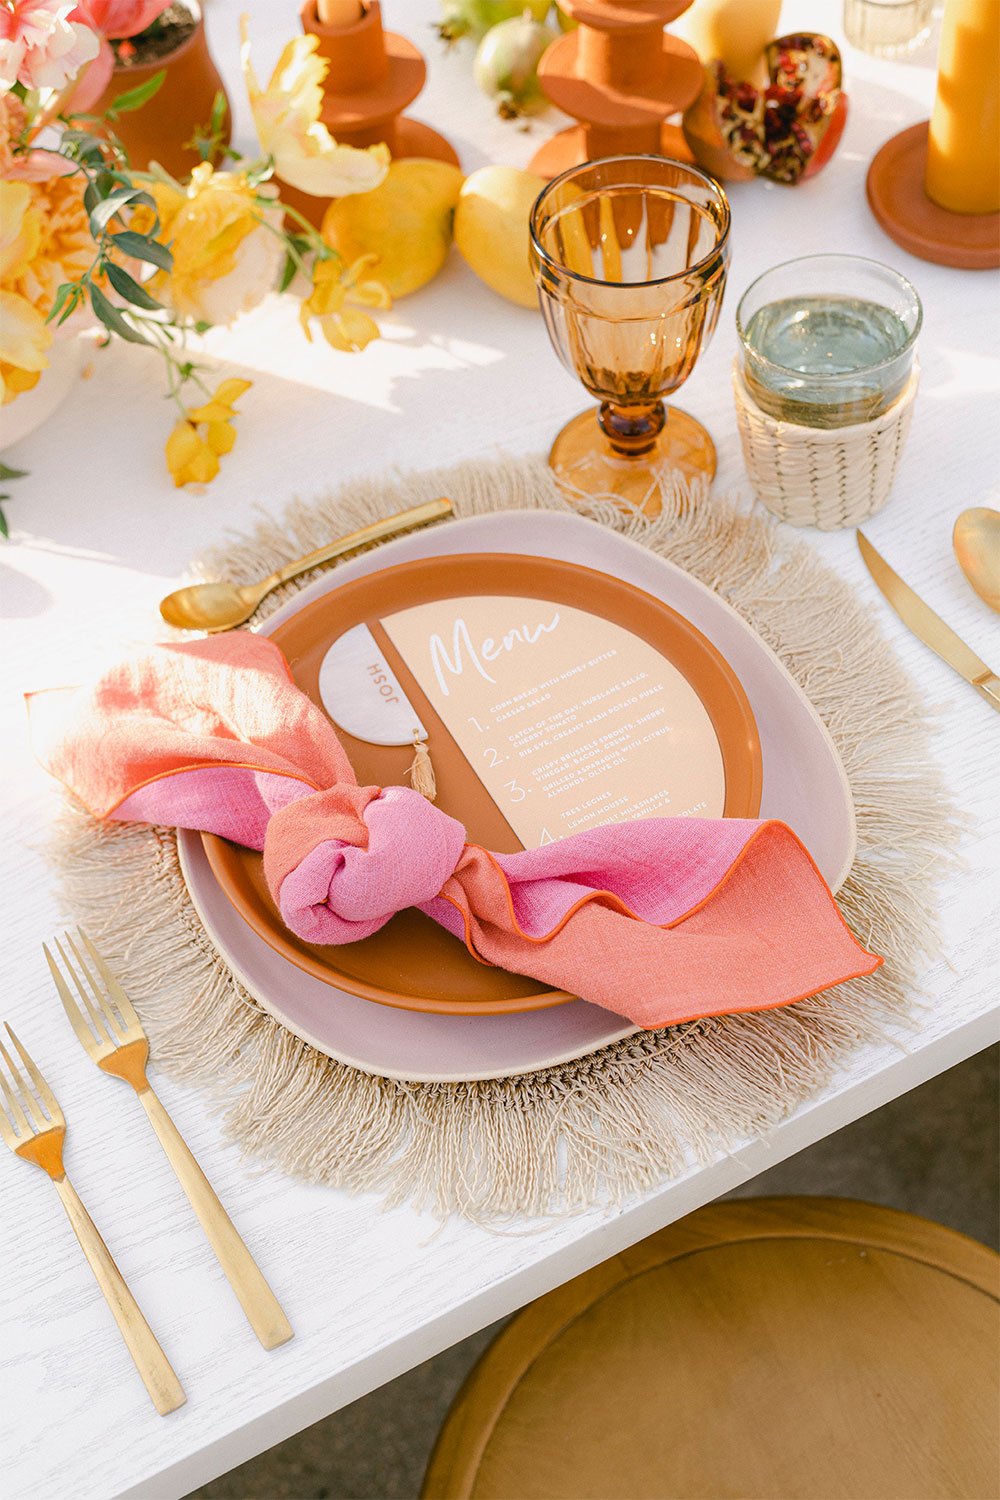 Cloth Napkins: Atelier Saucier's coral and pink linen napkins are tied into a table setting and placed on top of a menu and formal dinner table.